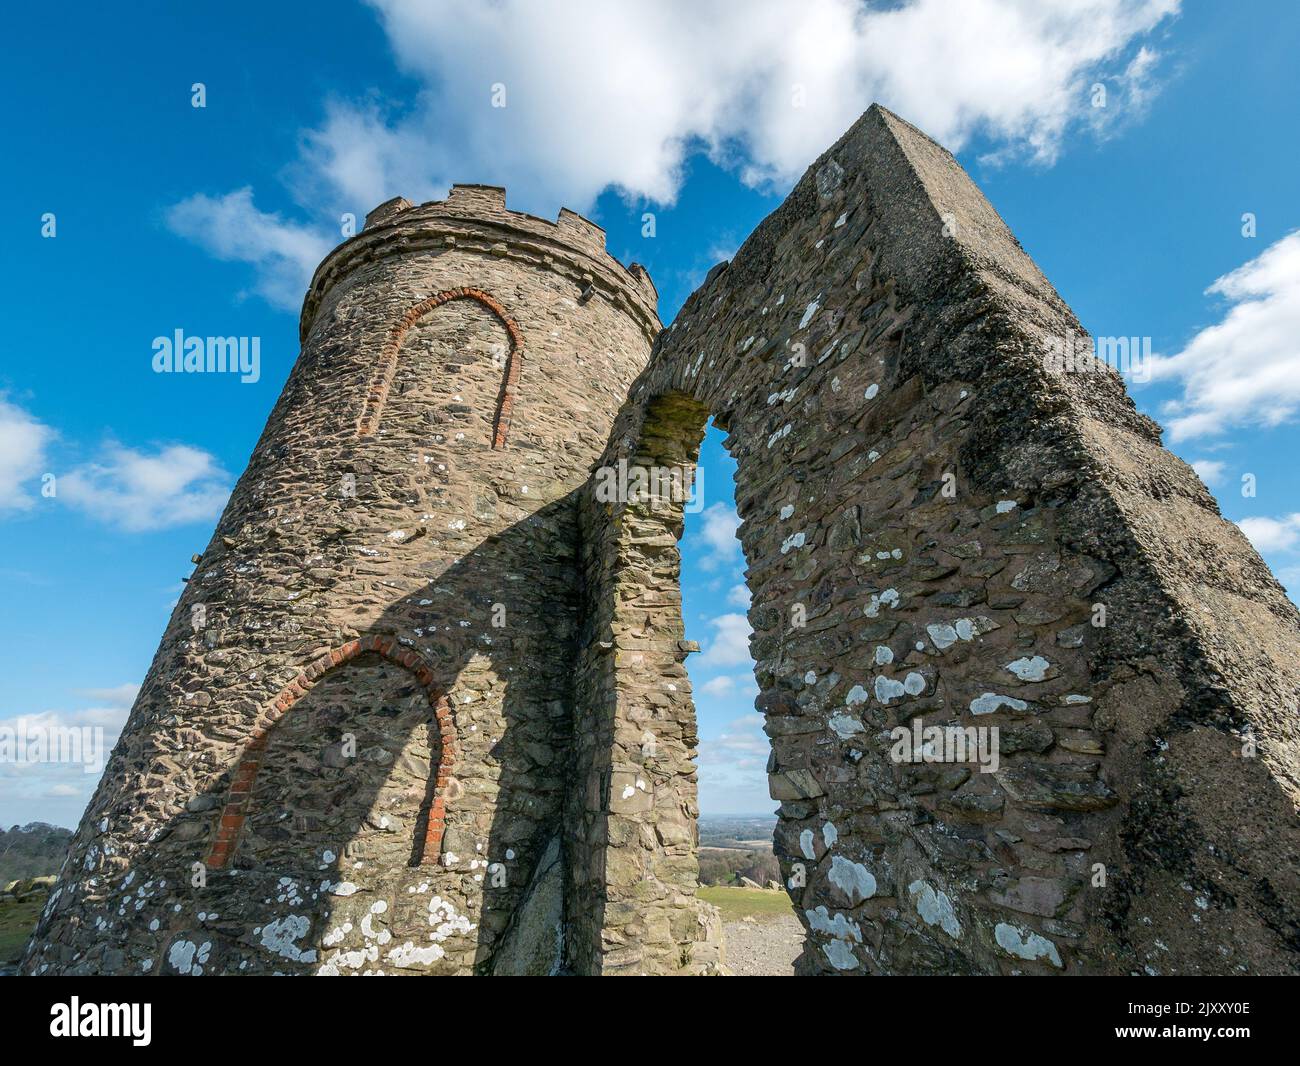 Old John folly against blue sky, Bradgate Park, Newtown Linford, Leicestershire, England, UK Stock Photo